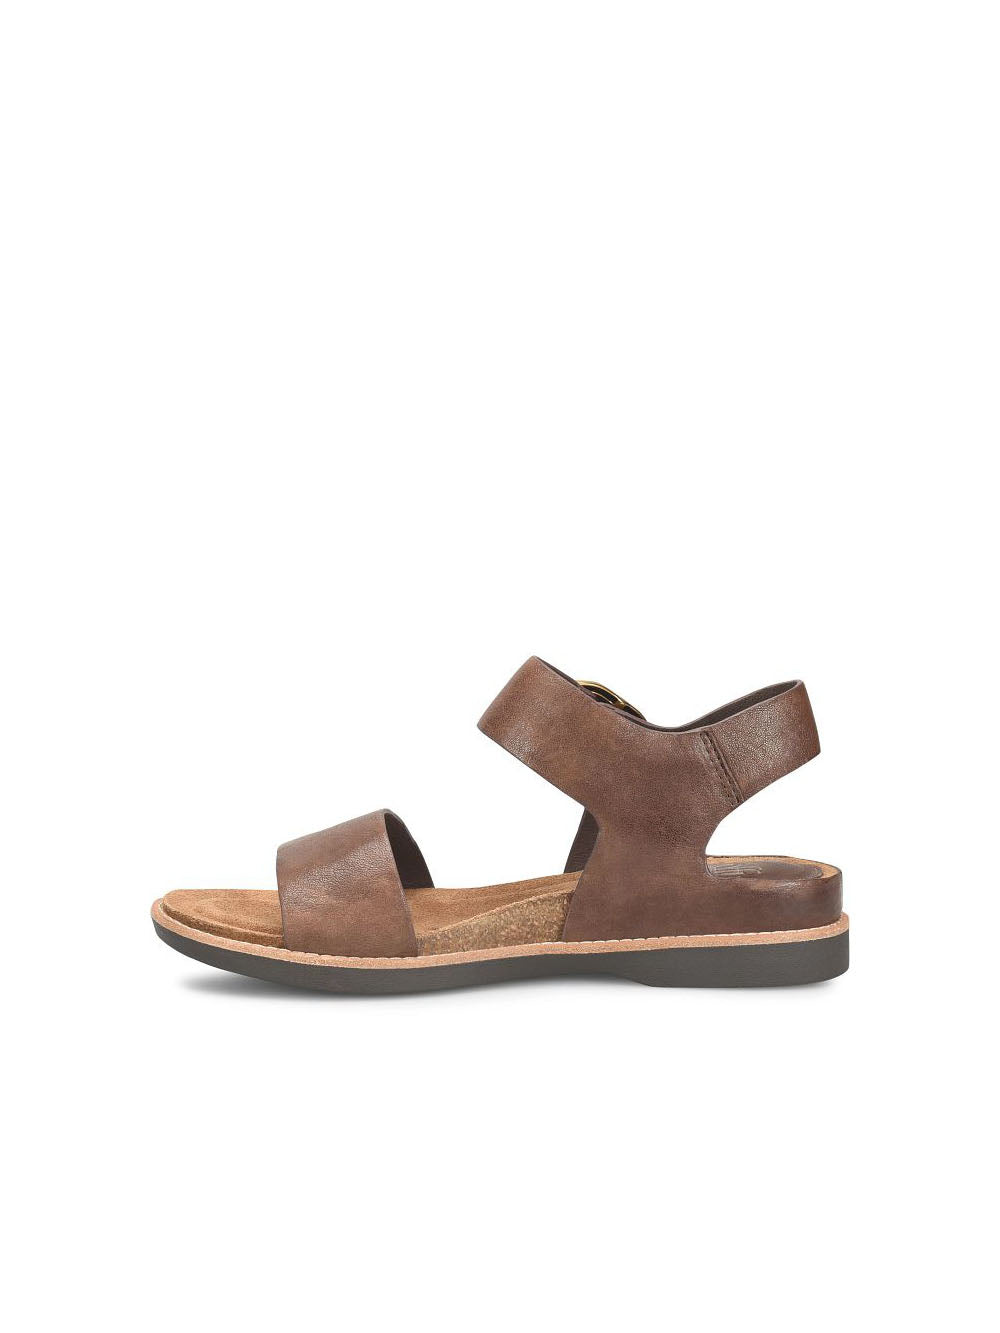 sofft shoes bali hook loop strap sandal in cocoa brown